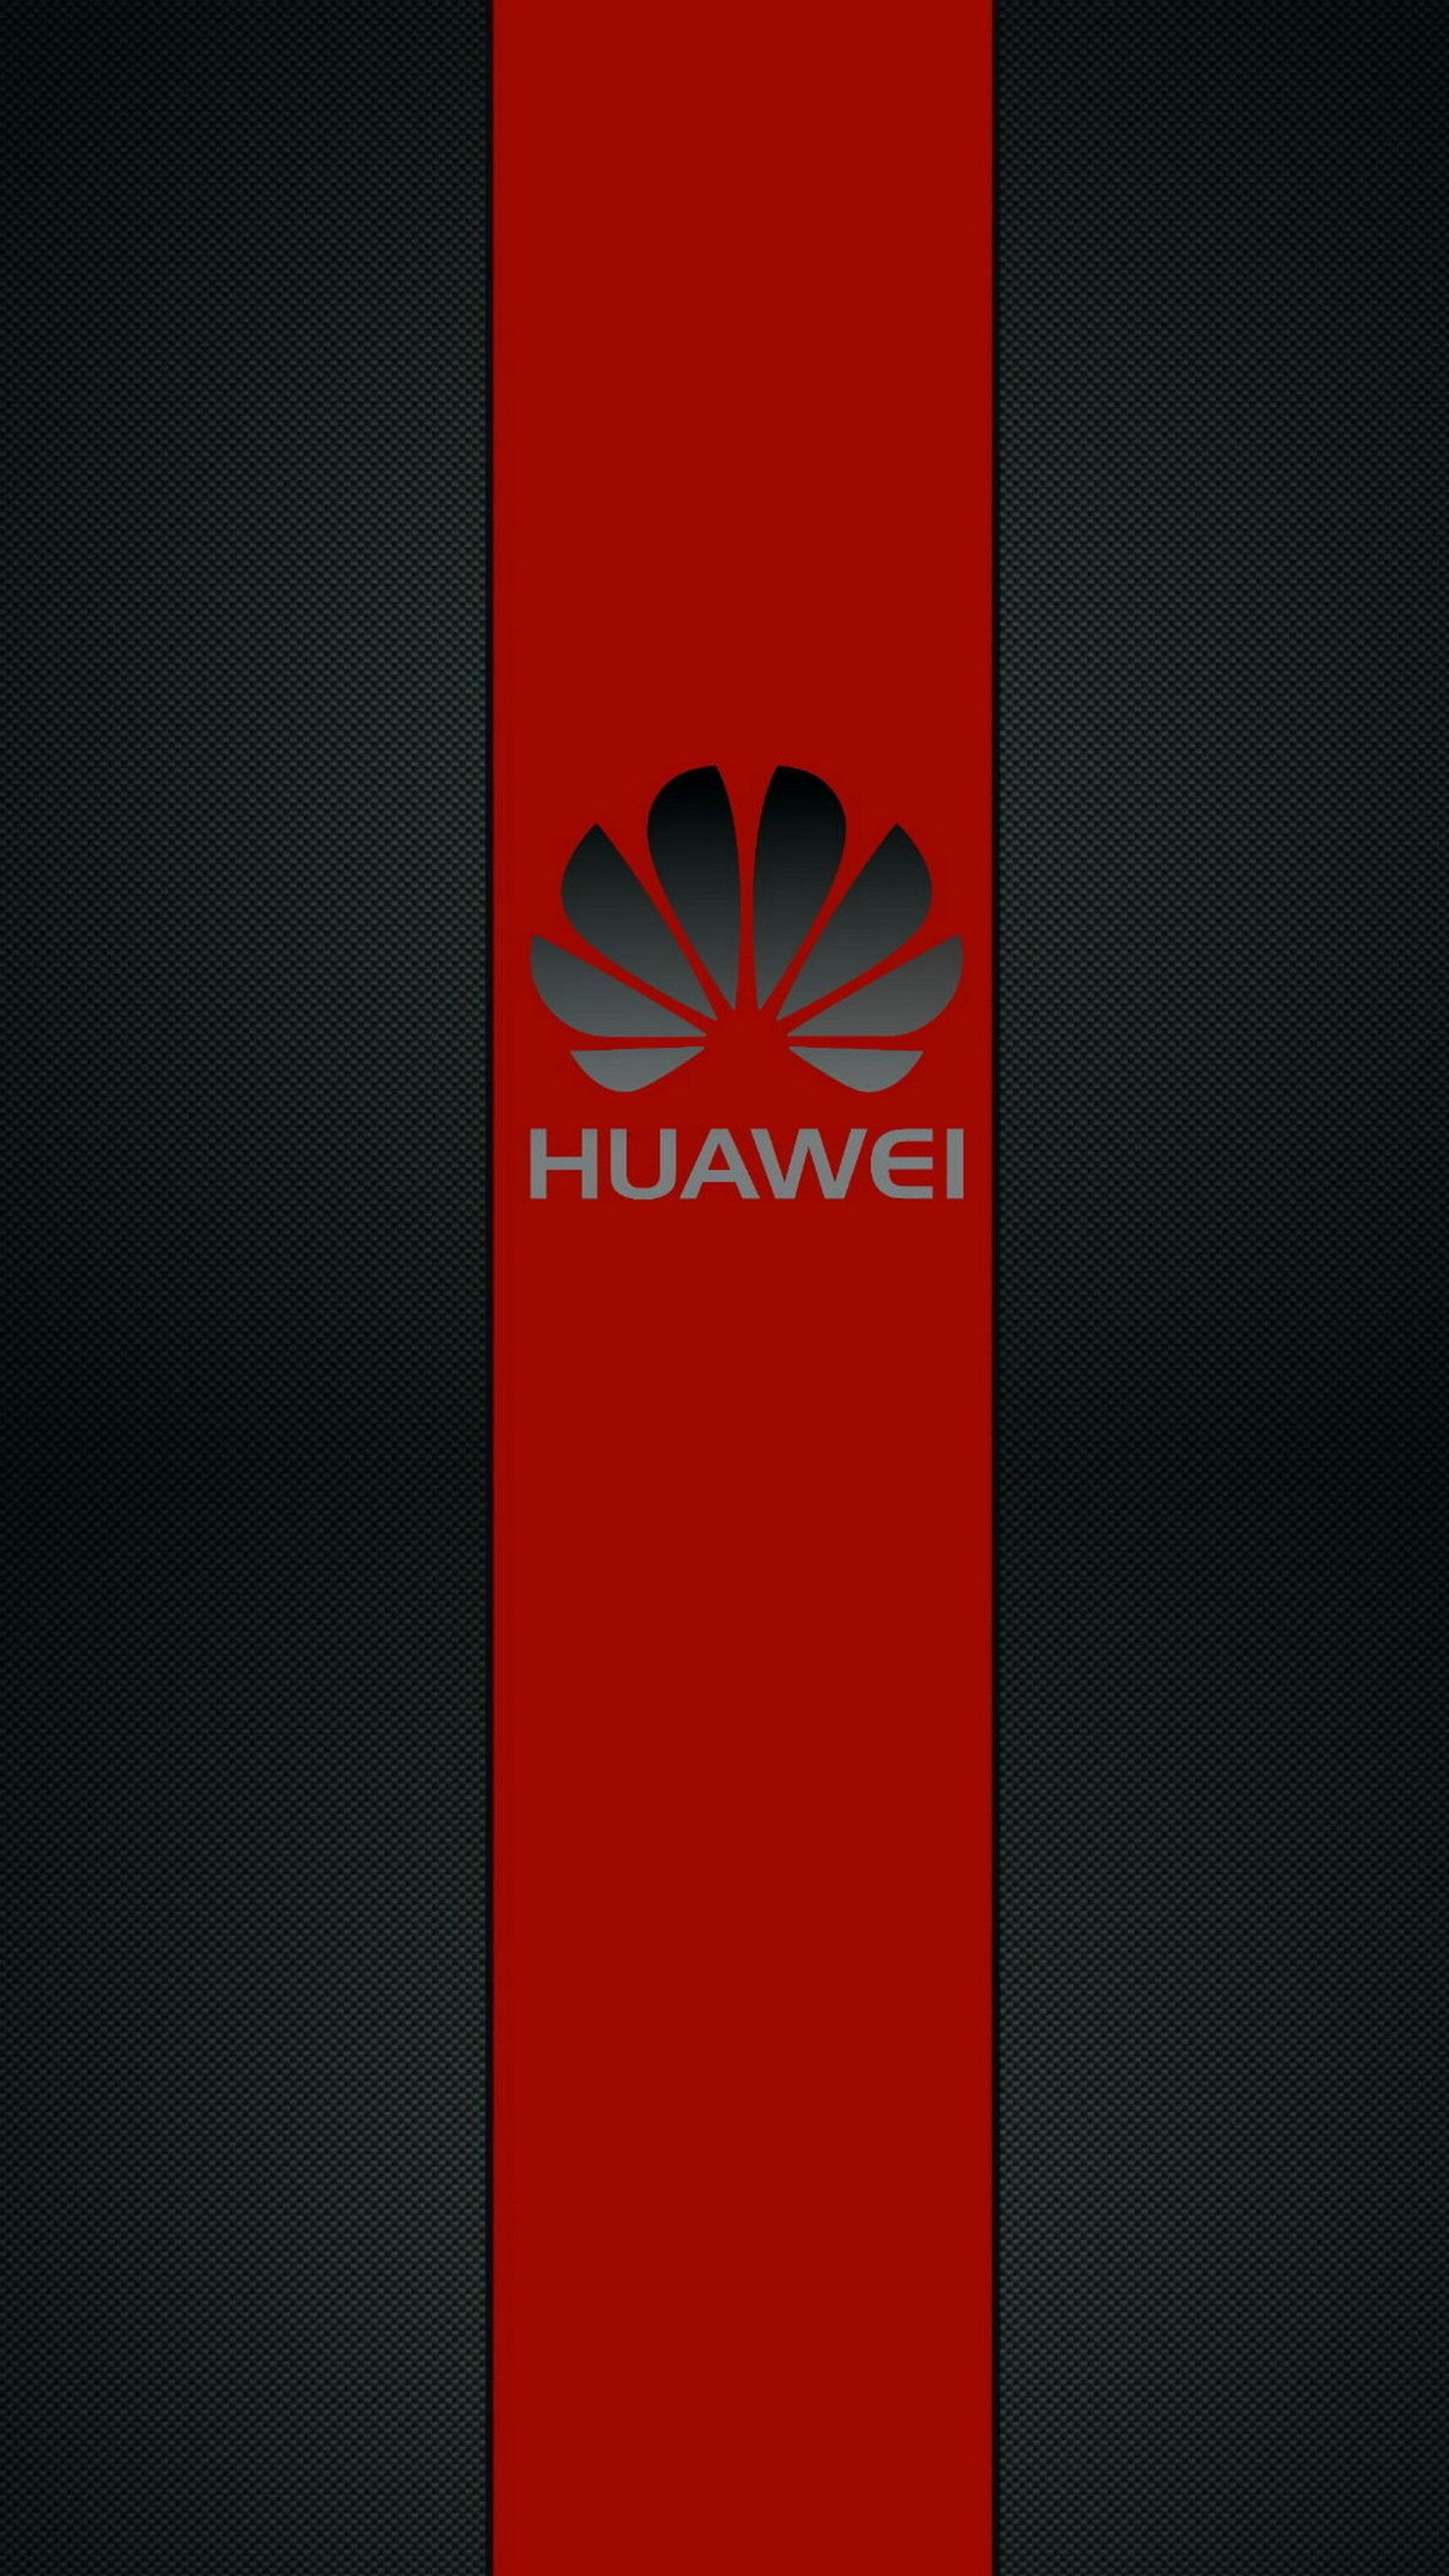 HUAWEI Logo, Android wallpapers, Christian wallpapers, Smartphone backgrounds, 1760x3120 HD Phone